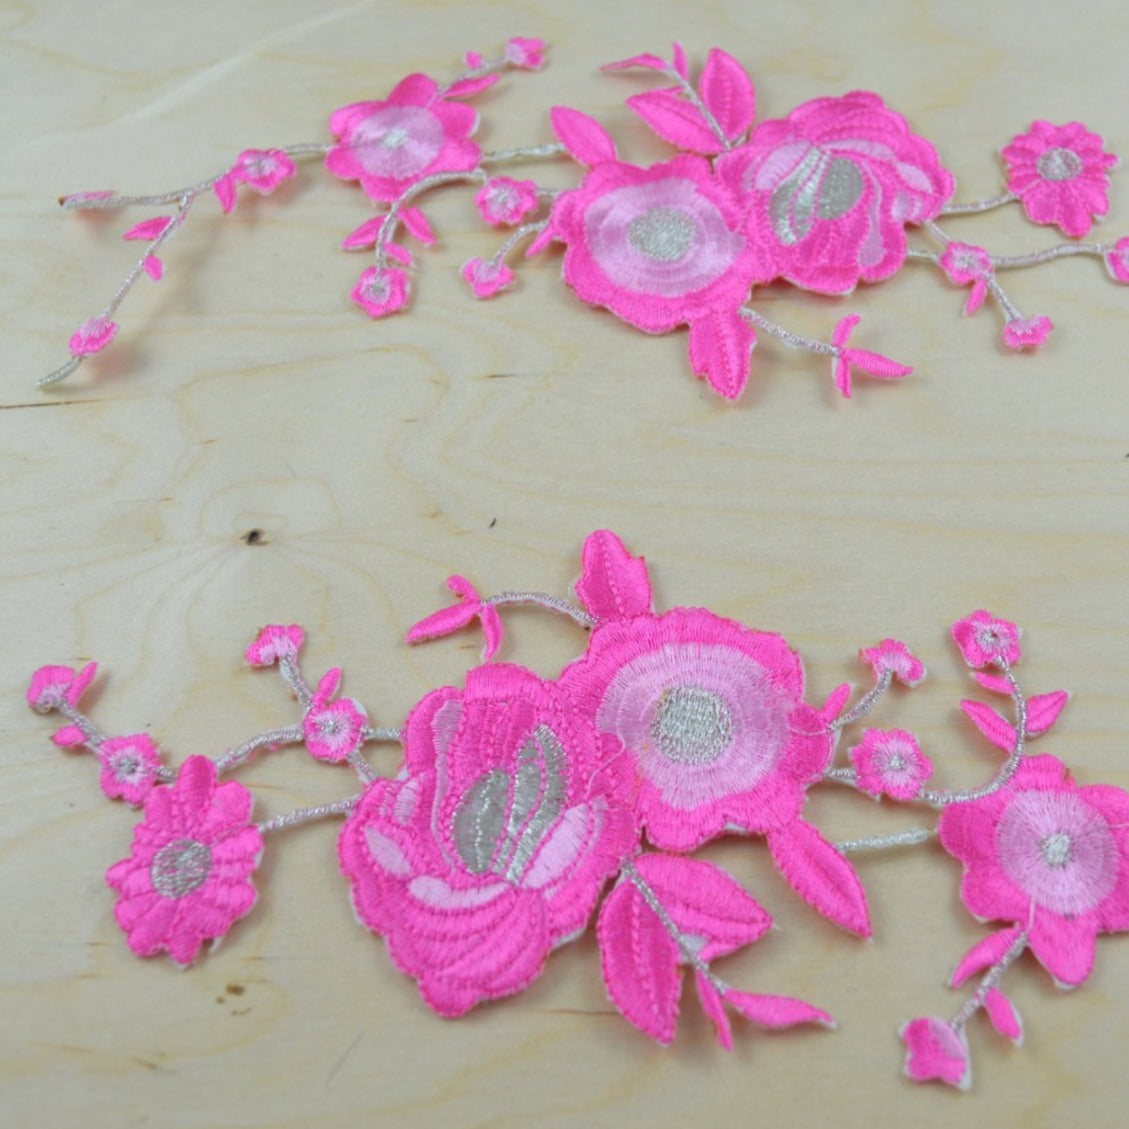 2 Pink Flower With Silver Accents Embroidery Patches/Applique